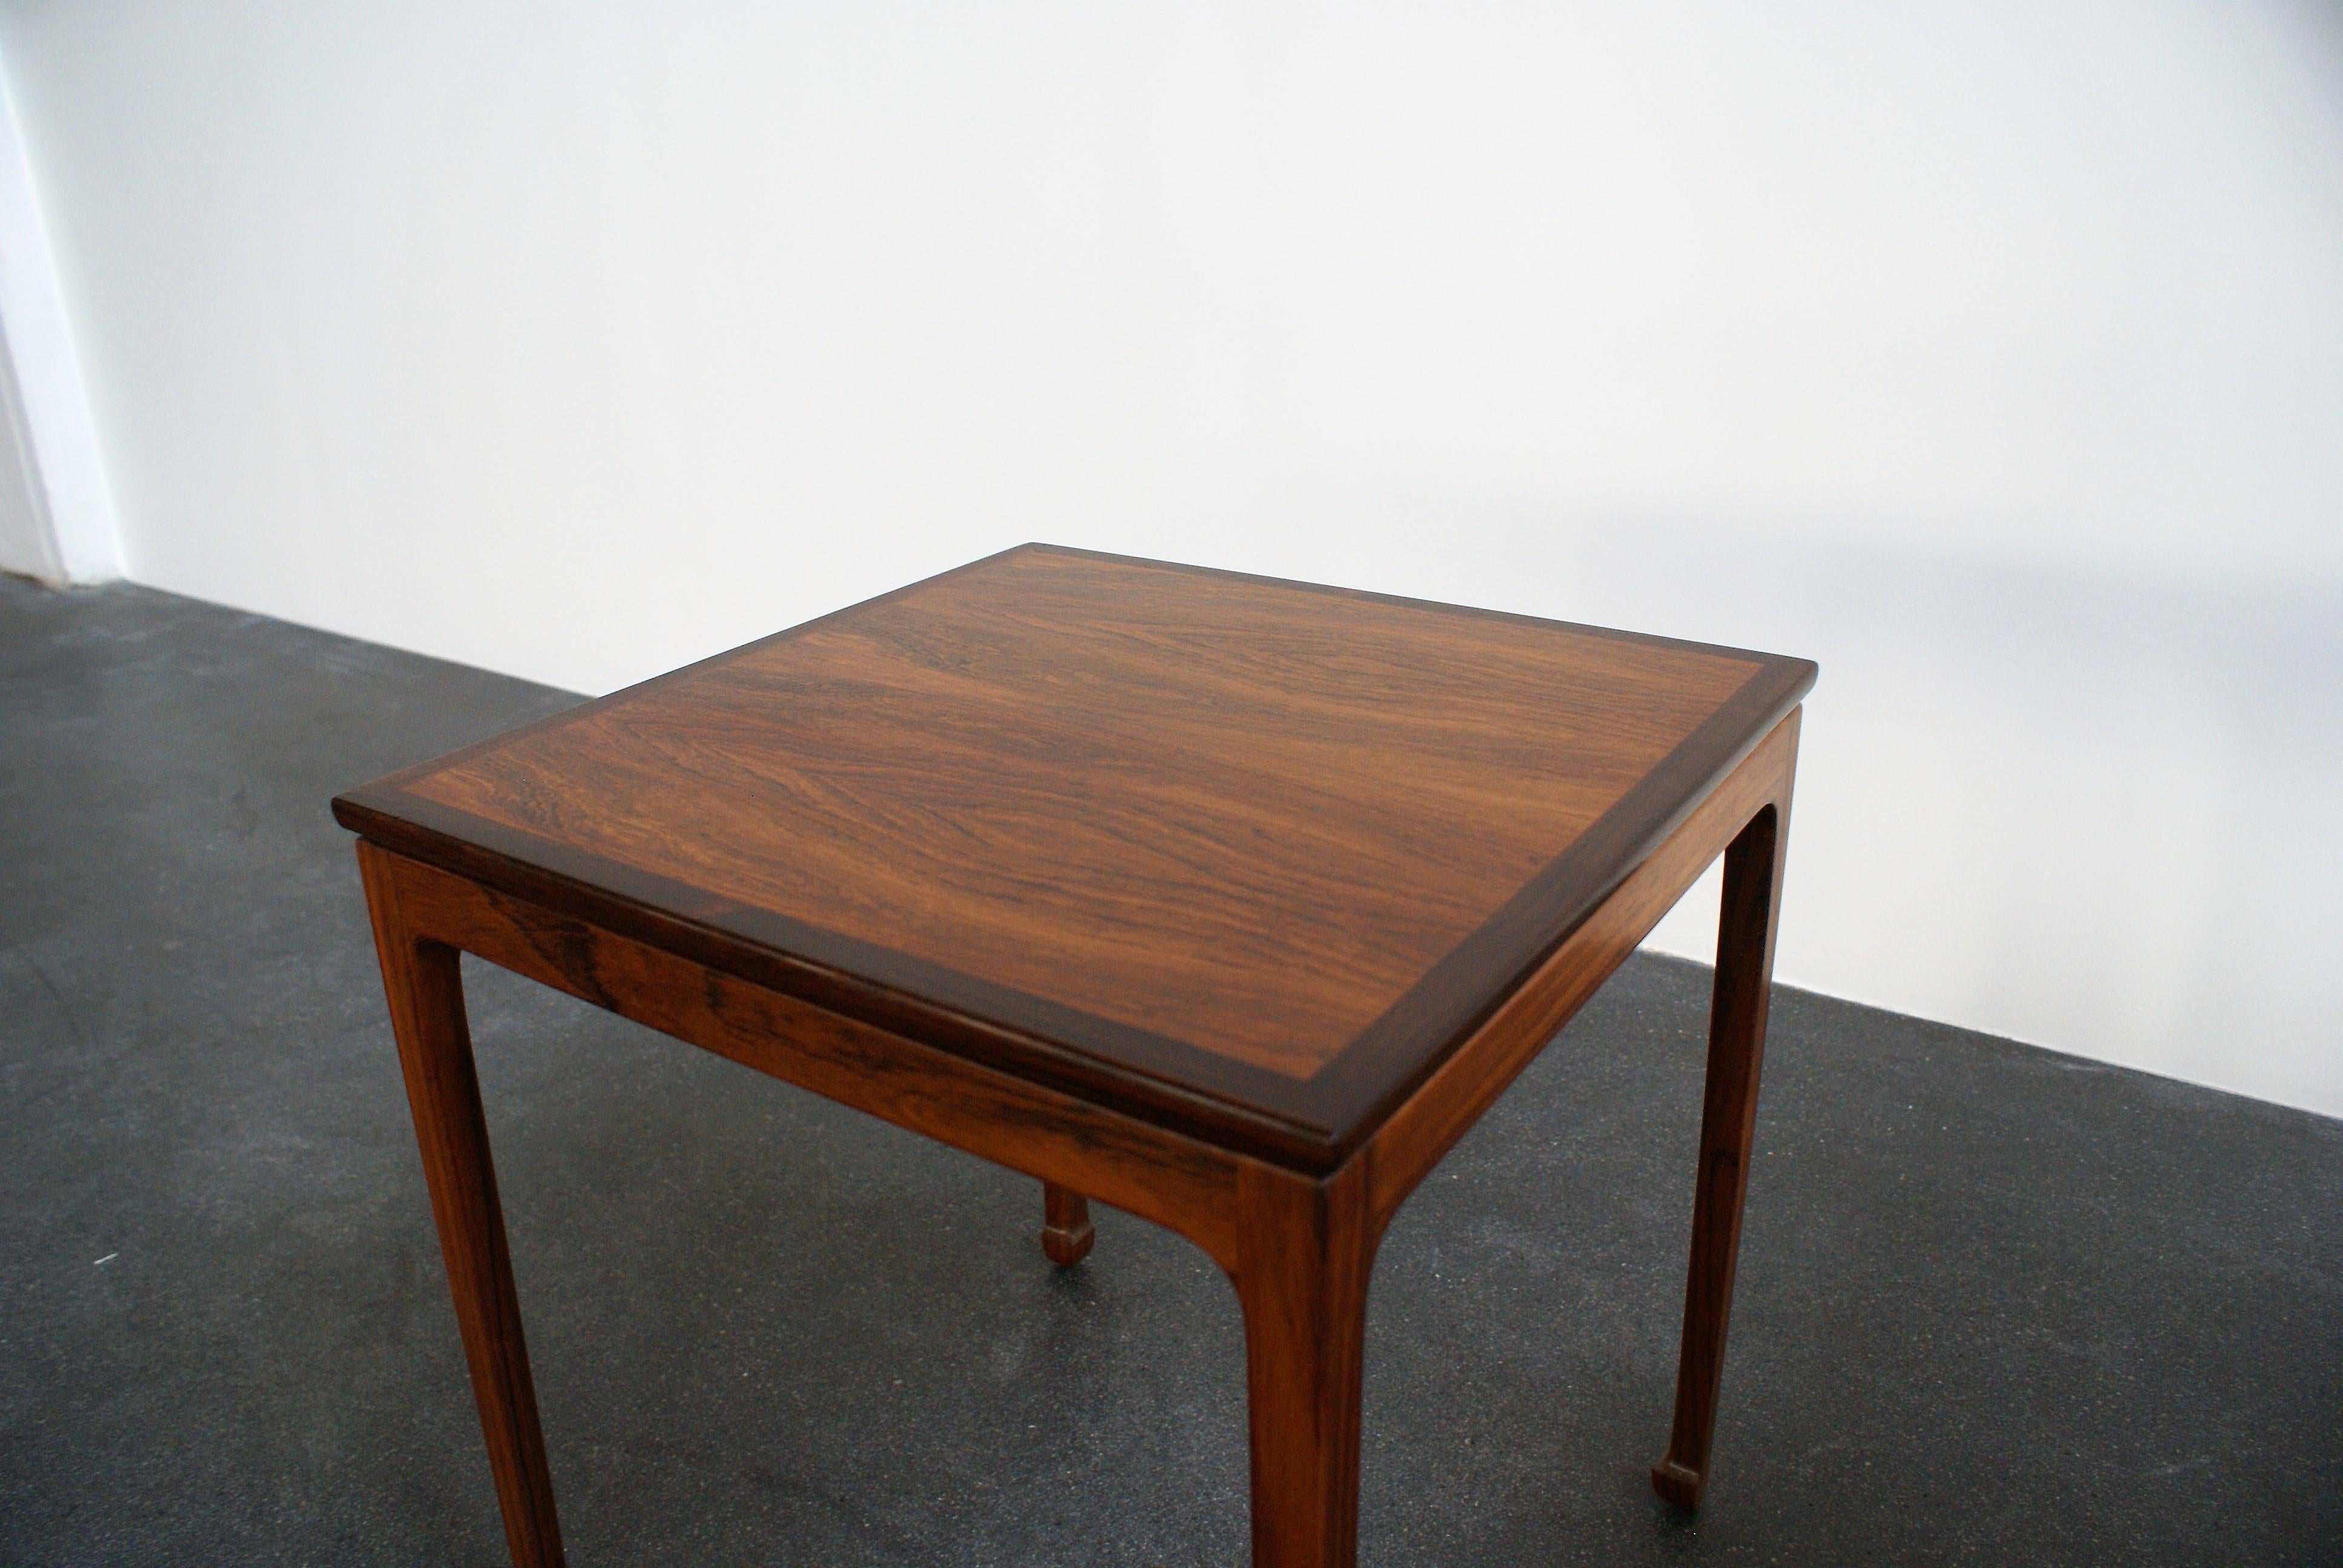 Mid-20th Century Ole Wanscher Pair of Side Tables in Brazilian Rosewood for A. J. Iversen, 1957 For Sale